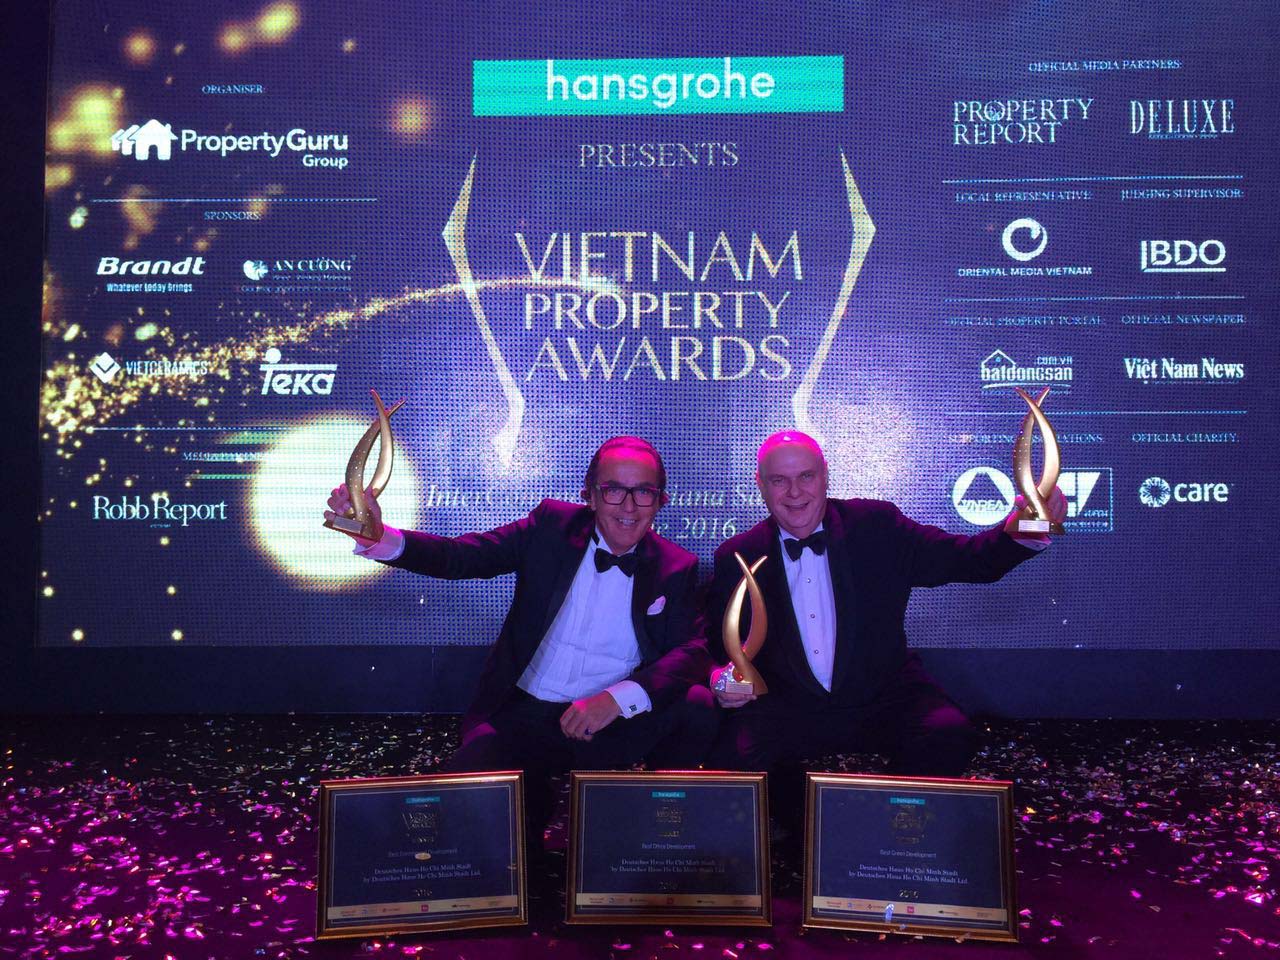 Deutsches Haus Ho Chi Minh Stadt wins further accolades and sweeps the Vietnam Property Awards 2016 with 3 major awards